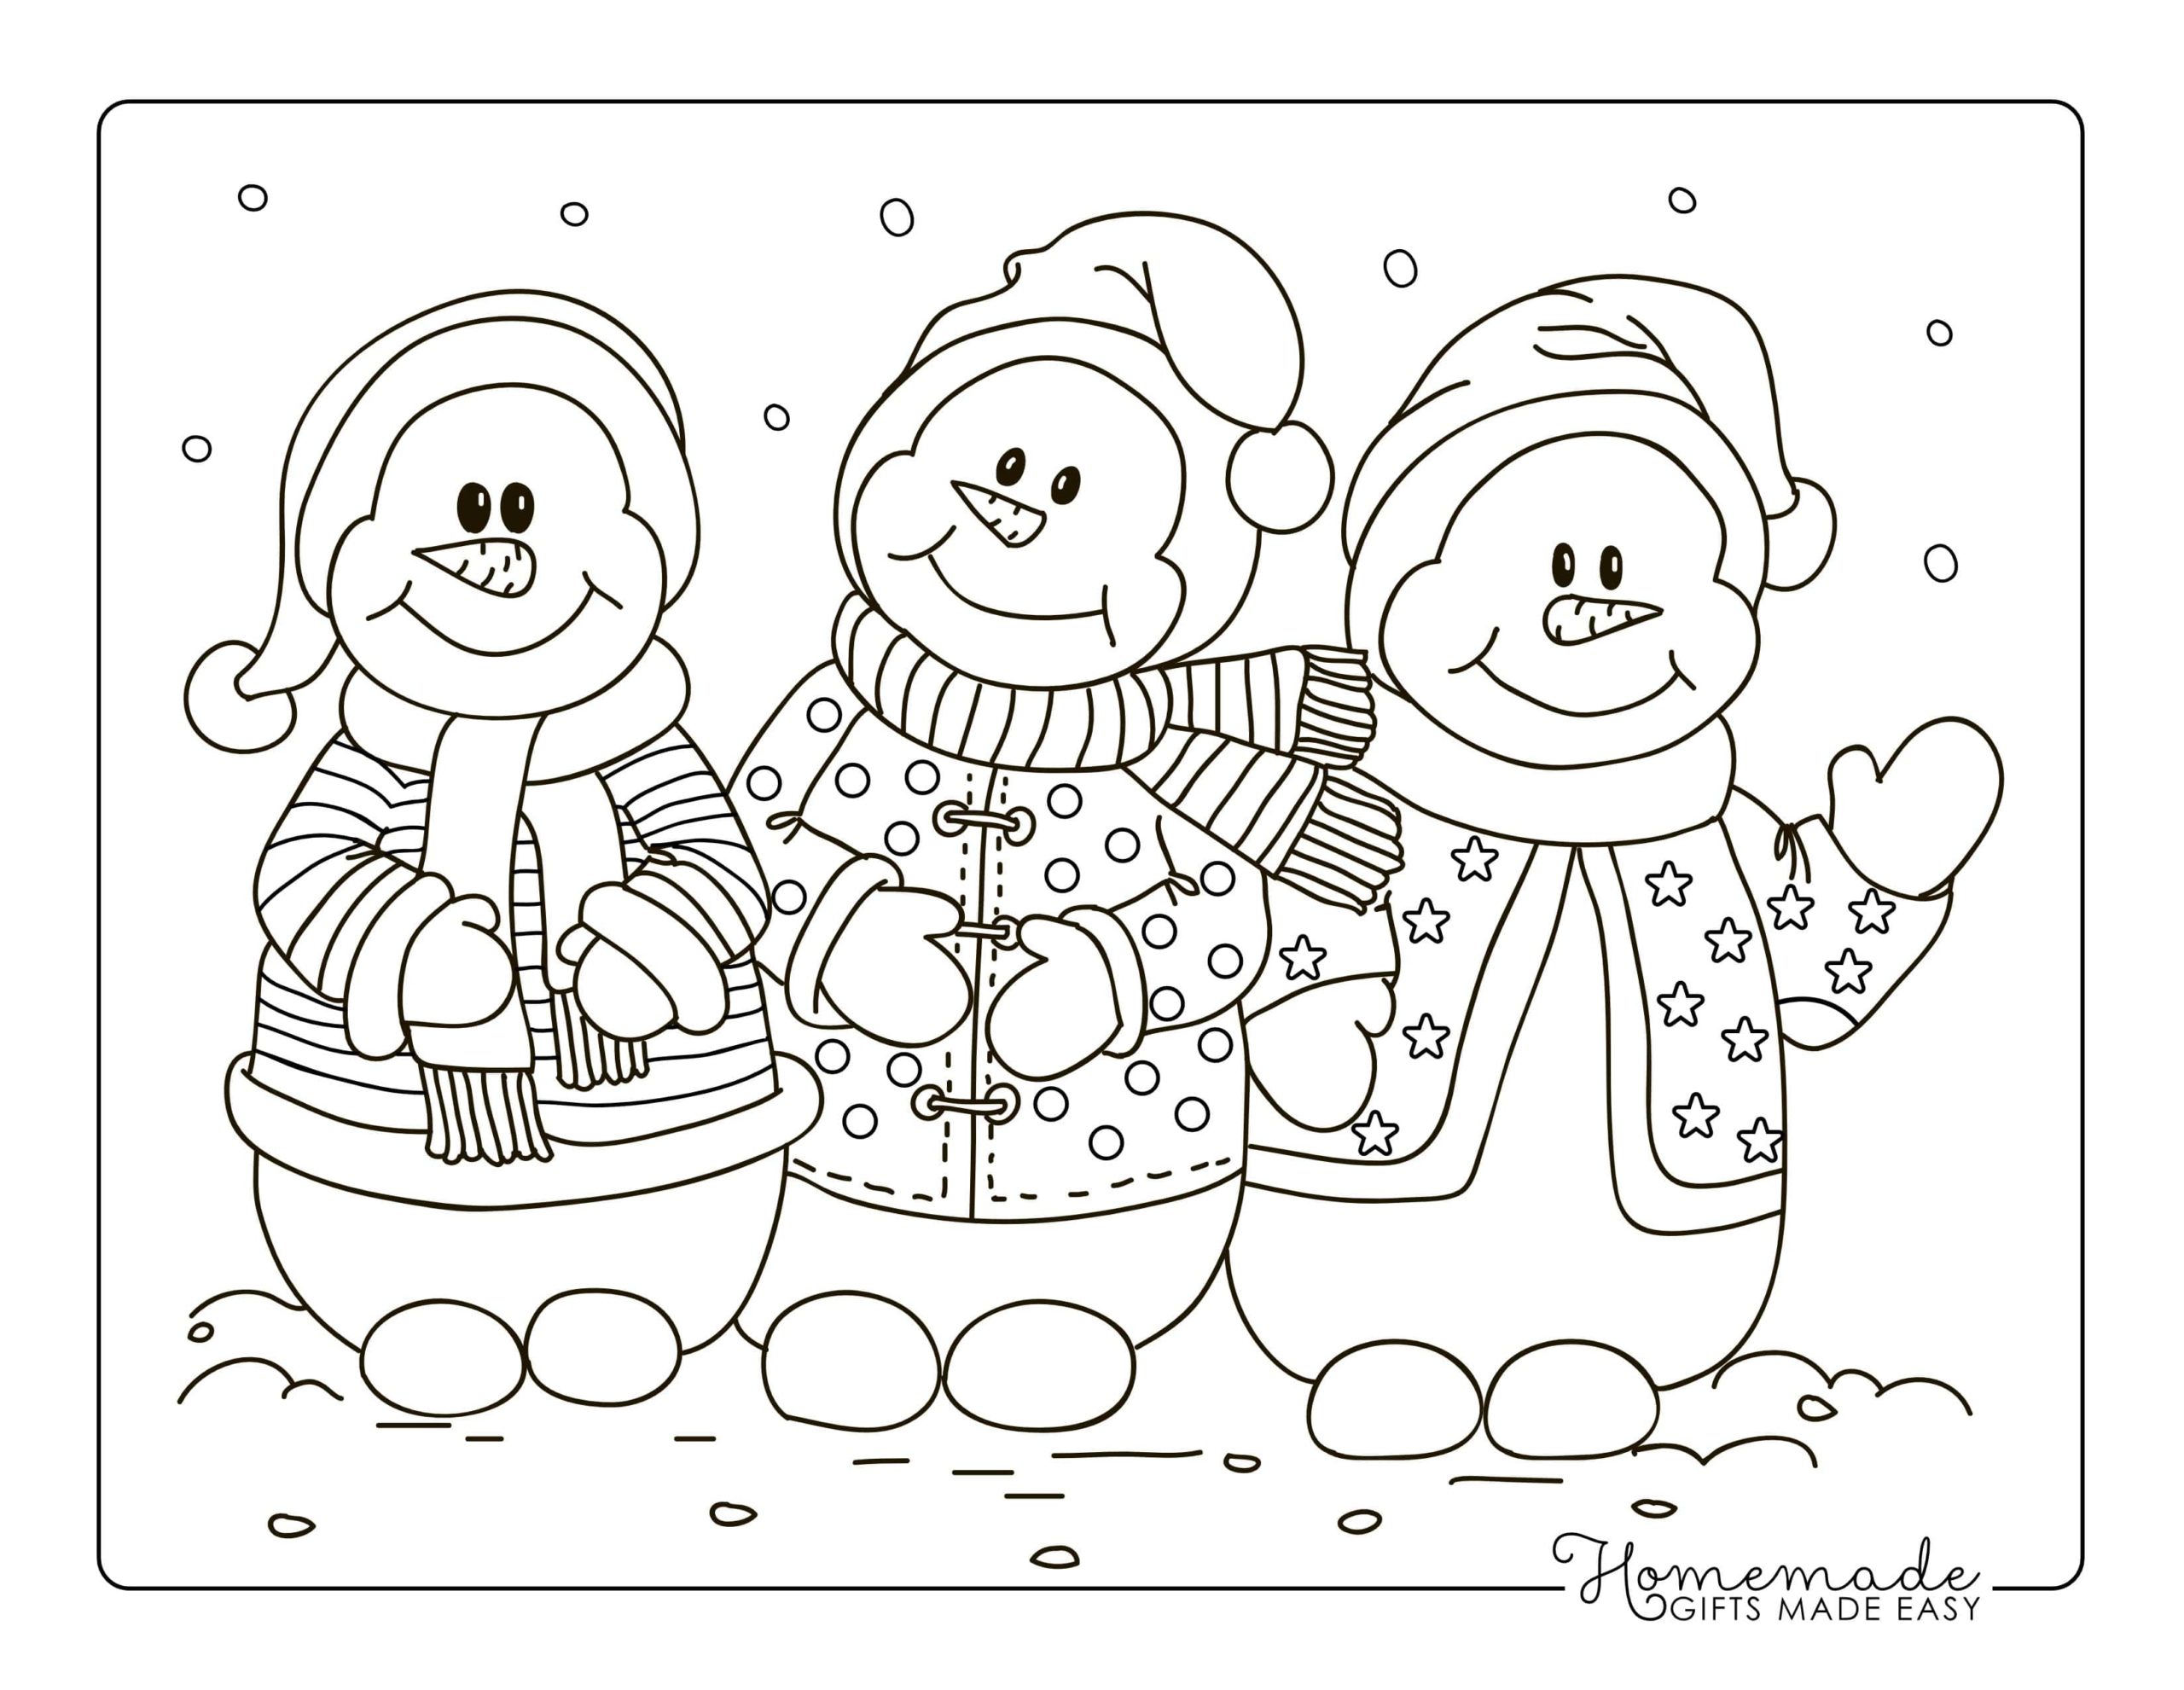 snowman face coloring pages | snowman family coloring pages | snowman fortnite coloring pages